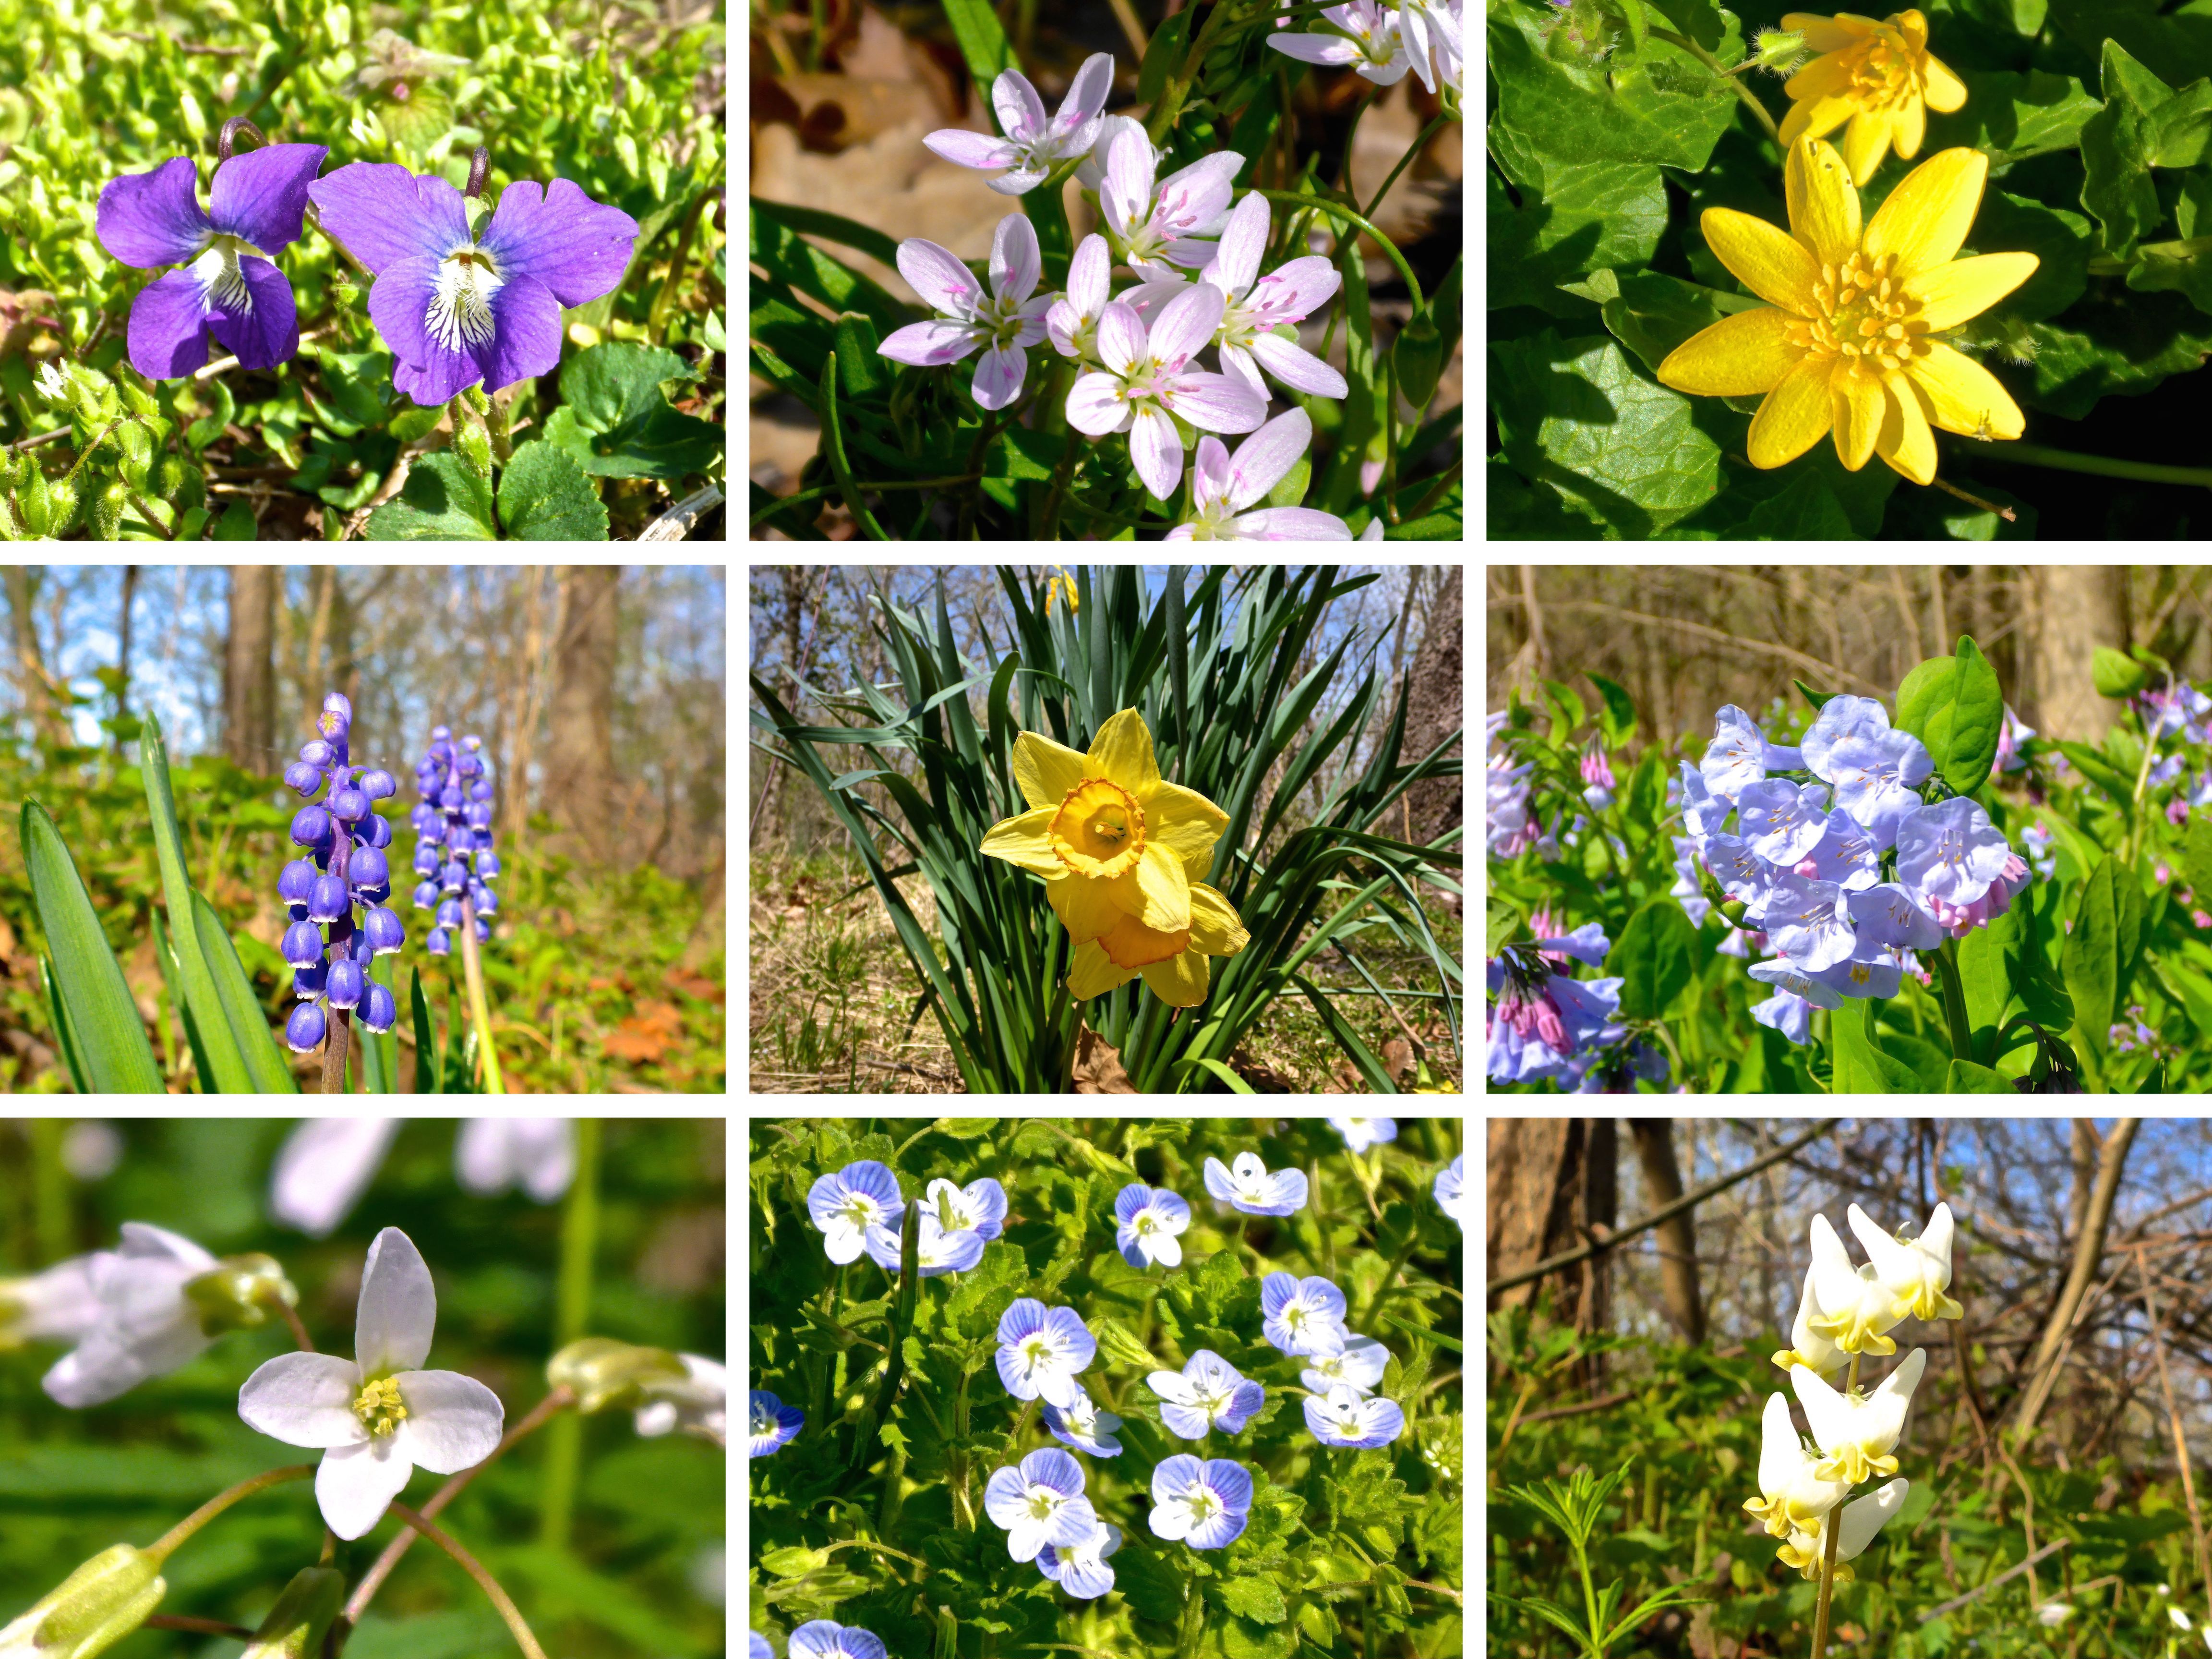 My first job, when I was 10 years old, was selling flower & vegetable seeds door-to-door. I bought a magic set. Top Row: arrow-leaved violet, spring beauty, lesser celandine. Middle Row: common grape hyacinth, wild daffodil, Virginia bluebell. Bottom Row: cutleaf toothwort, speedwell (not sure which subspecies), Dutchman's breeches.